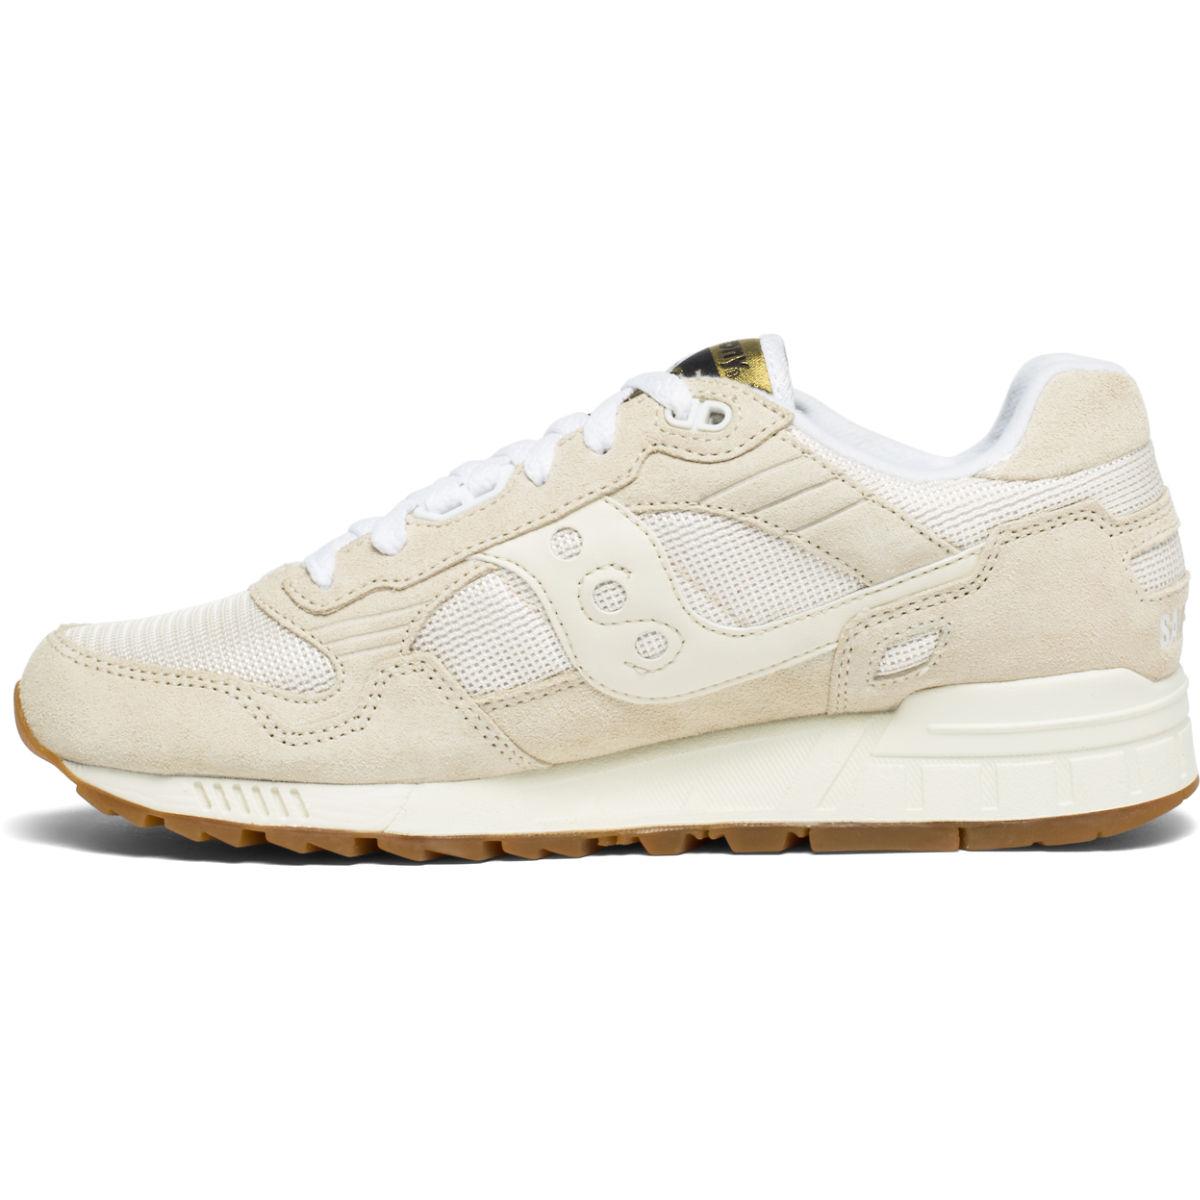 Saucony Suede Shadow 5000 Vintage in Tan | White (White) for Men - Lyst